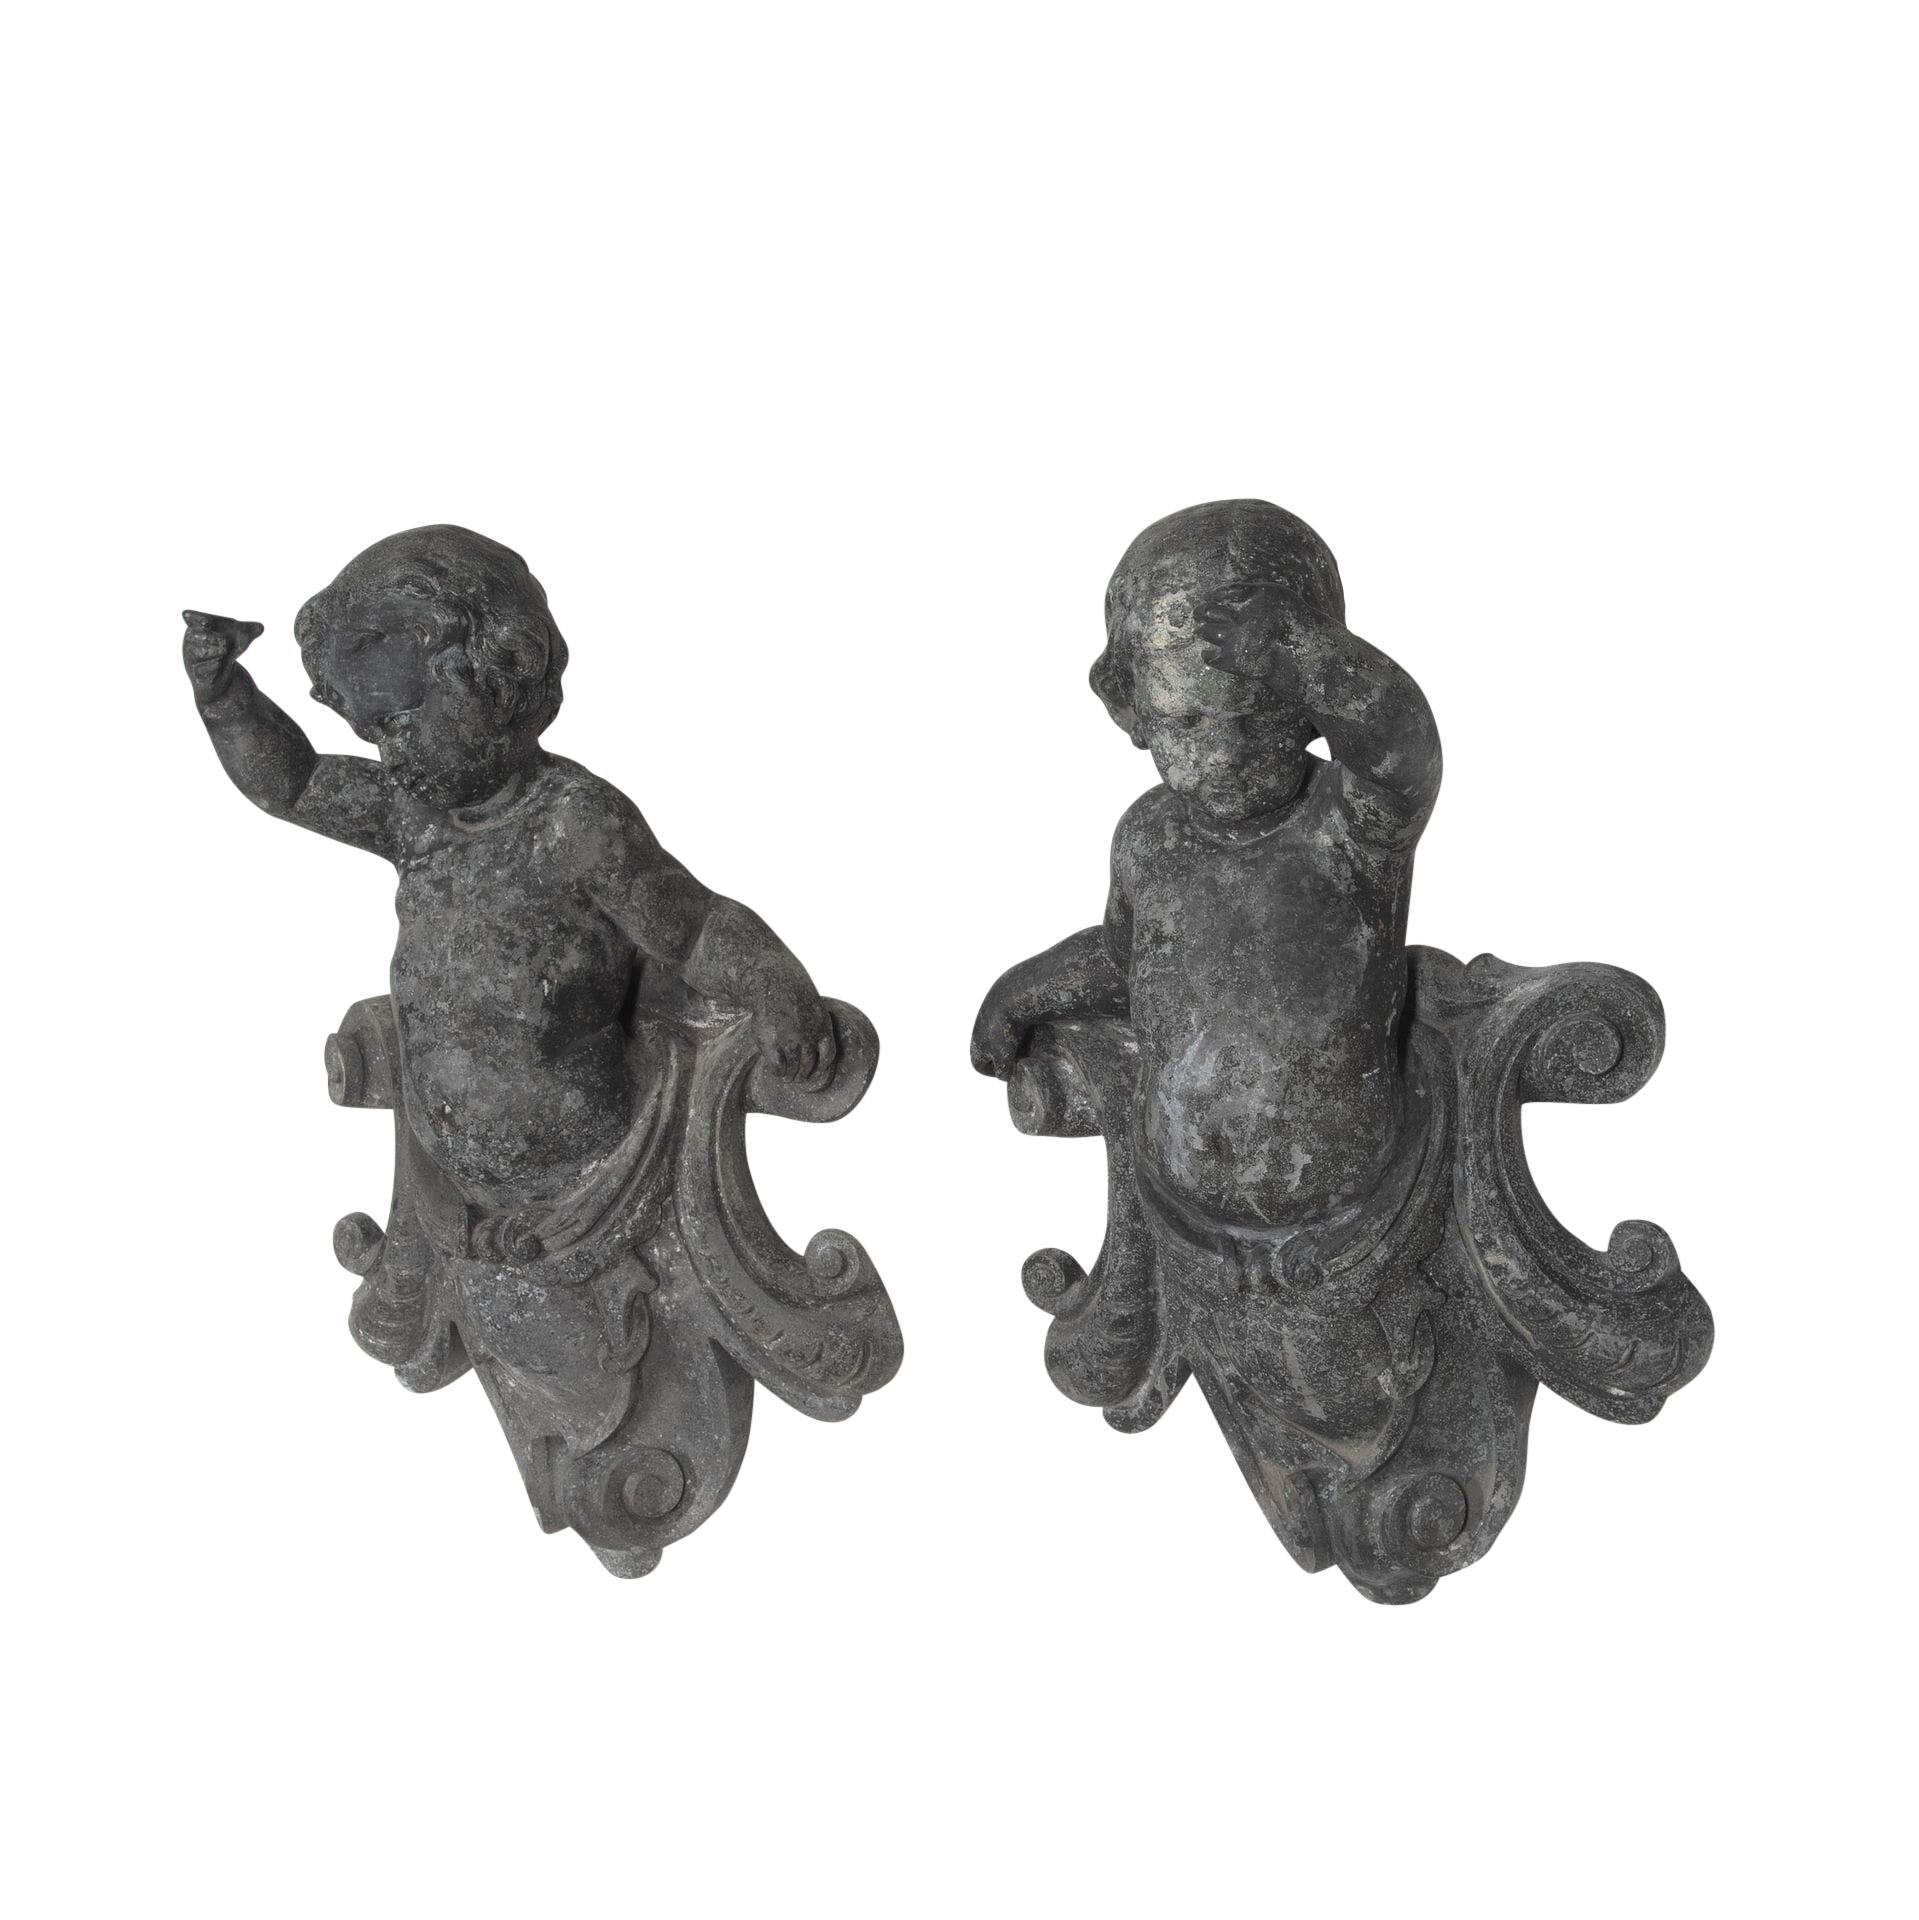 Pair of 19th Century French Cast Alloy Putti Figures In Good Condition For Sale In Tetbury, Gloucestershire